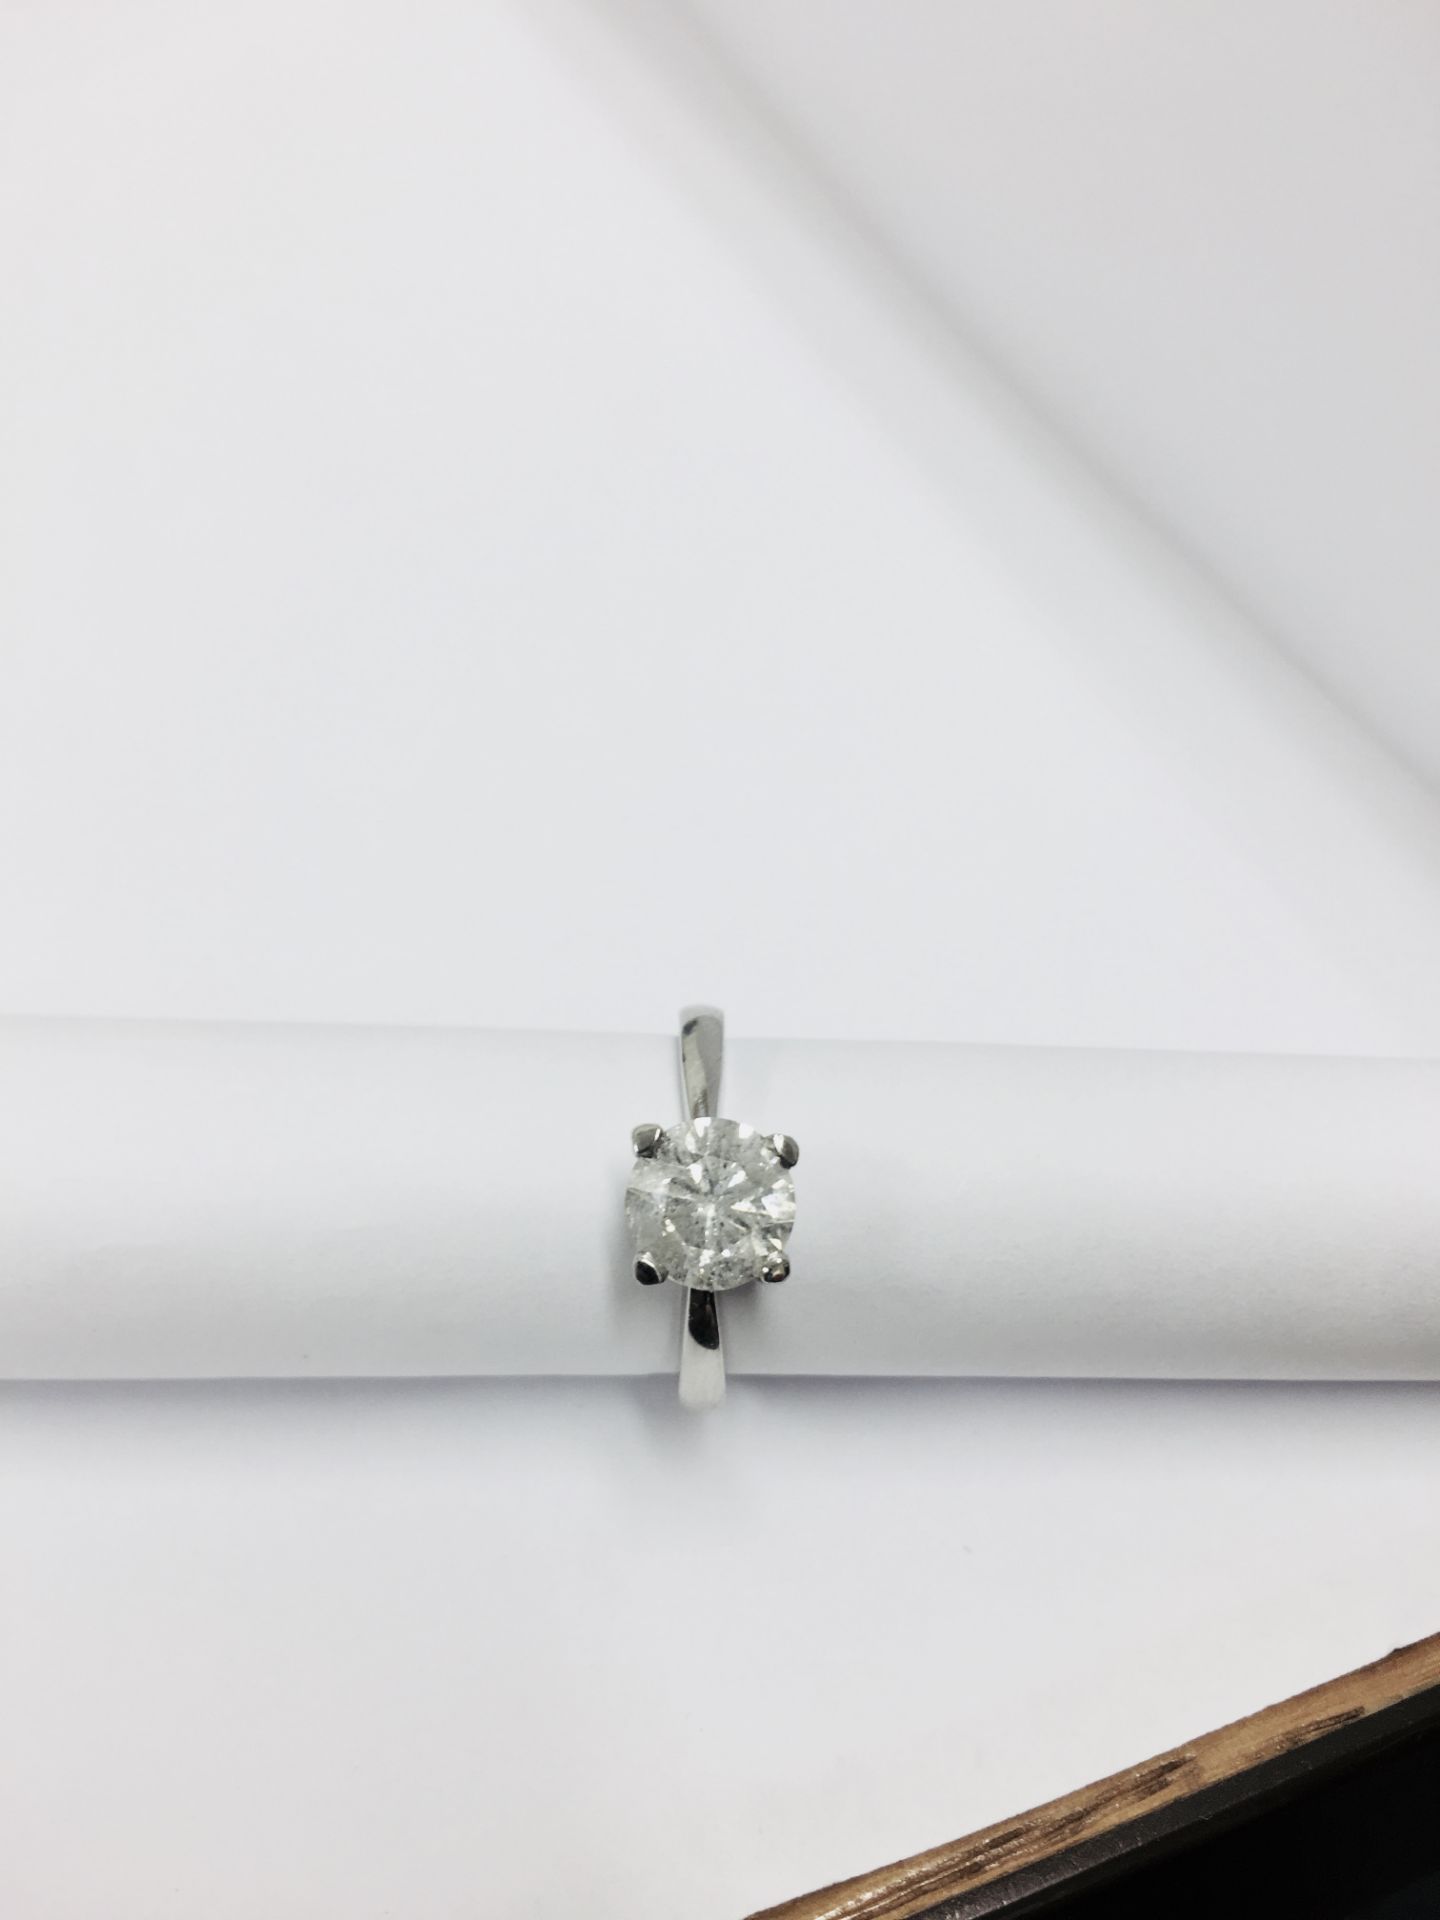 1.55ct diamond solitaire ring set in platinum. Enchanced diamond, H colour and I2 clarity. 4 claw